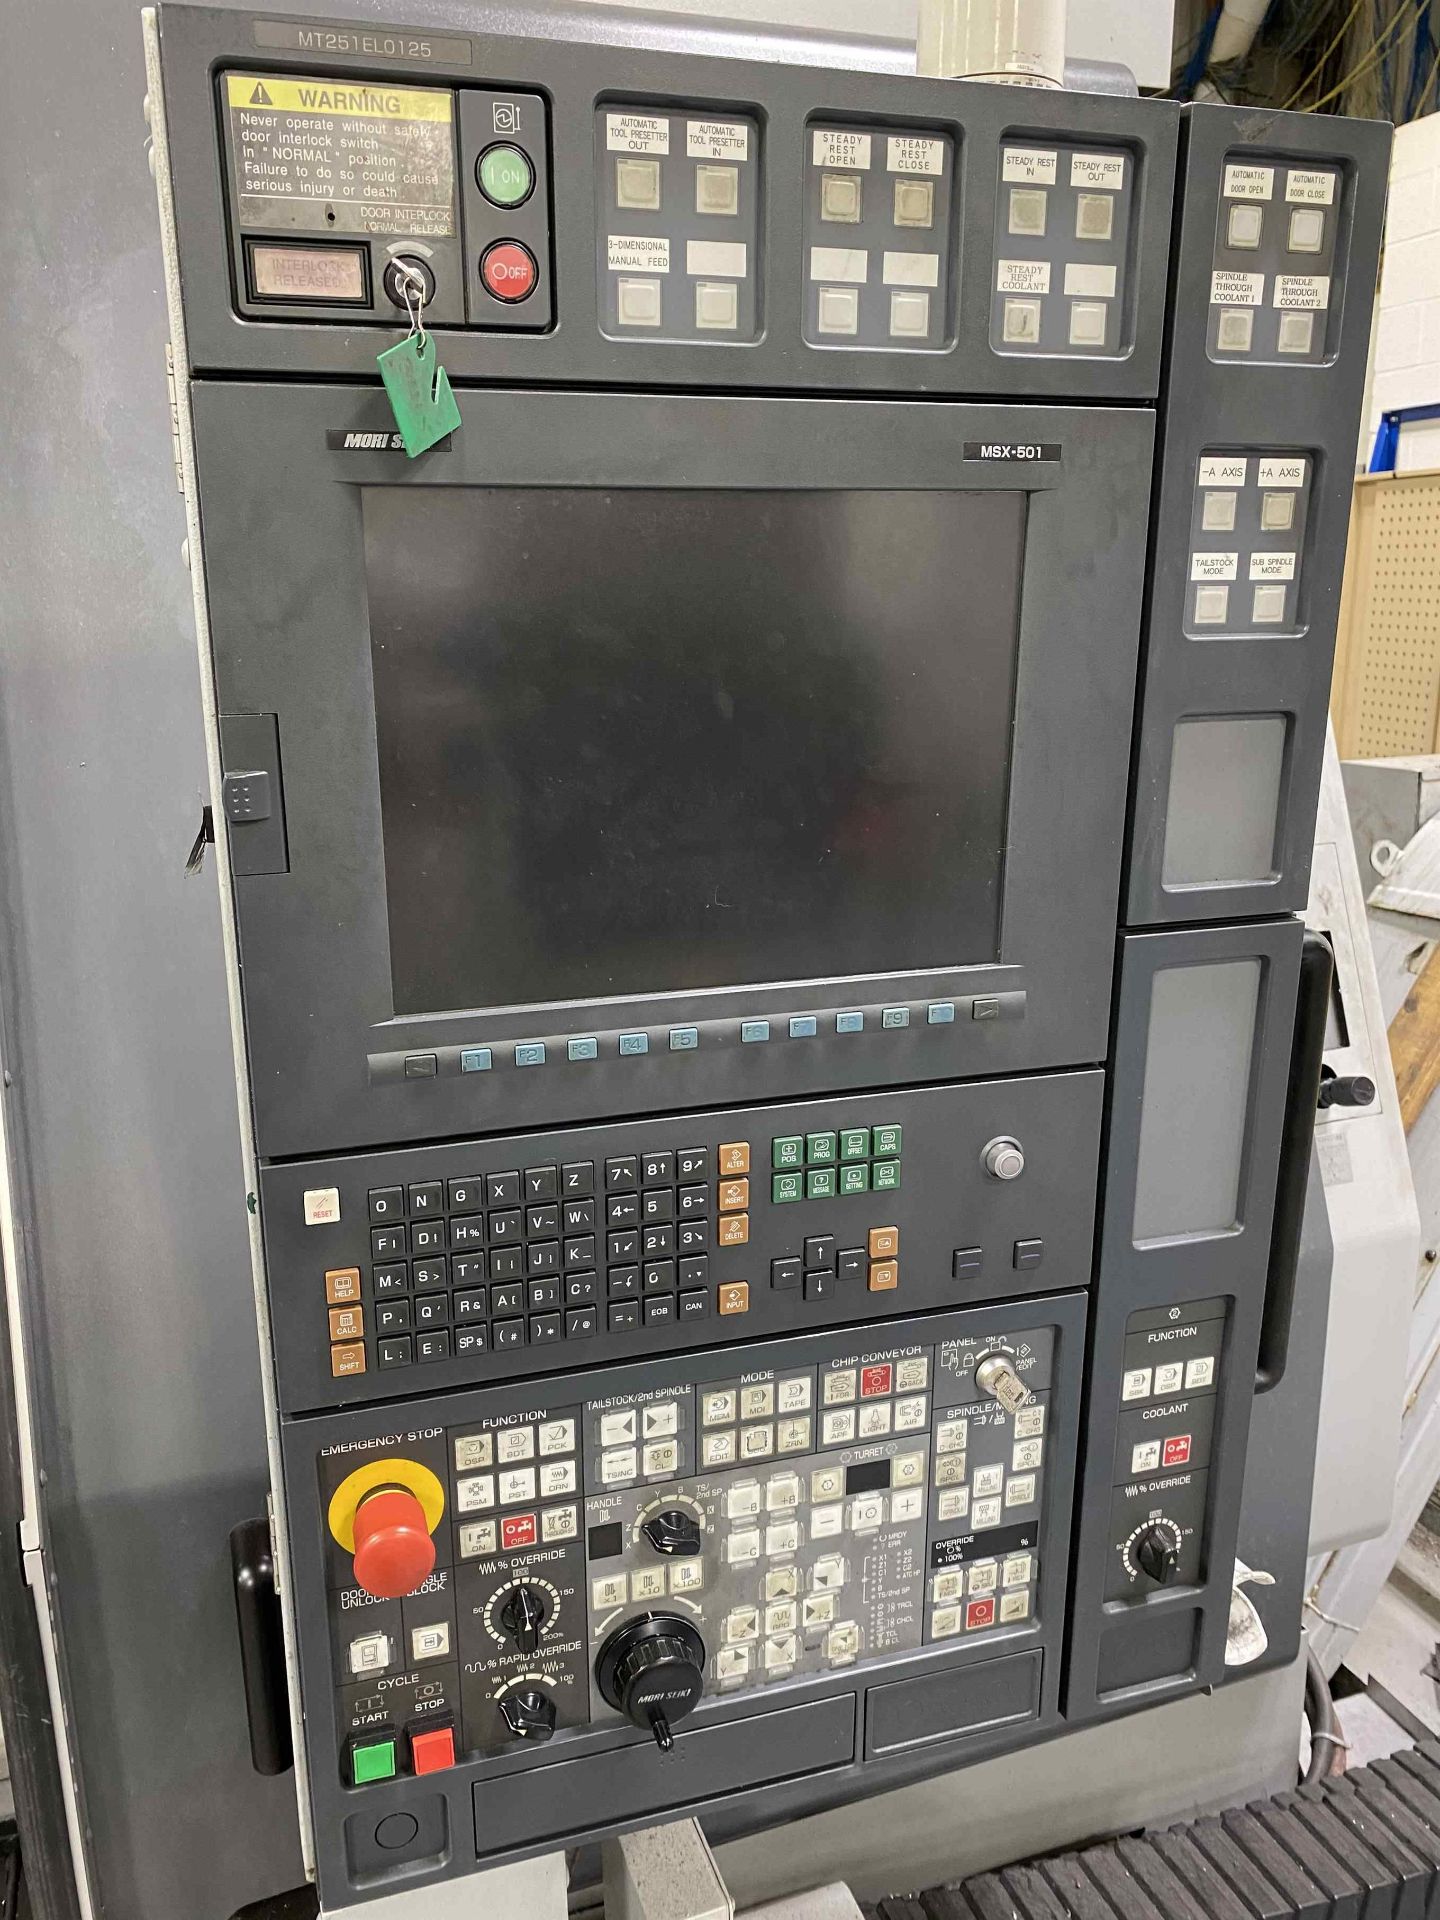 2006 MORI SEIKI MT2500S/1500 Turning/Milling Center, s/n MT251EL0125, w/ MSX-501 Control (NO TOOLING - Image 9 of 13